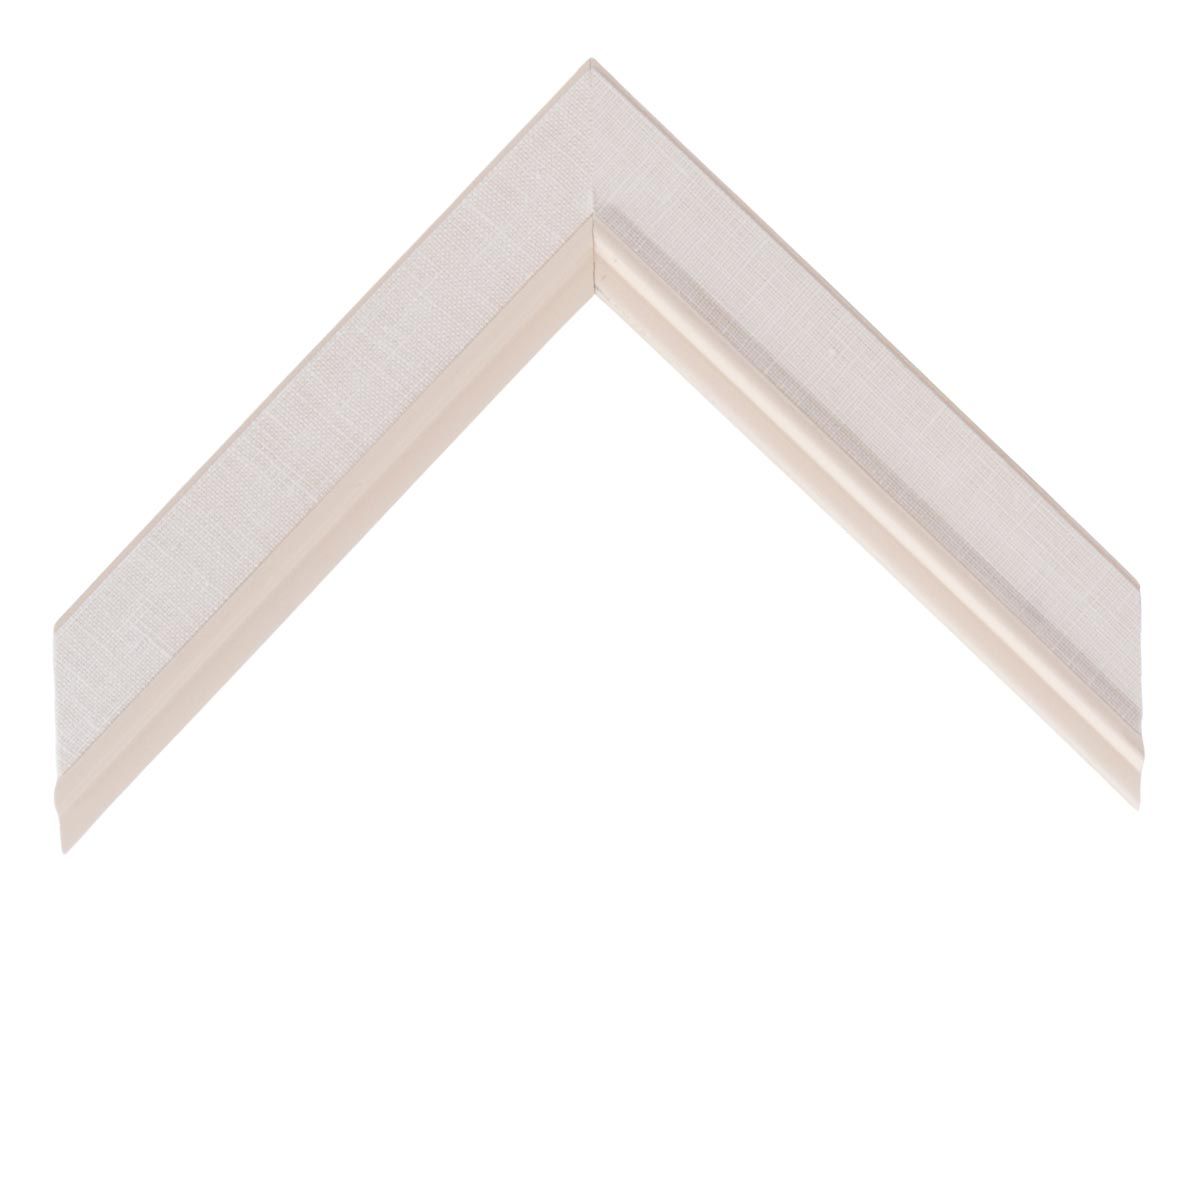 Linen Liner Moulding - Natural, White Bead ML120-1-¼, 16 x 20 inches